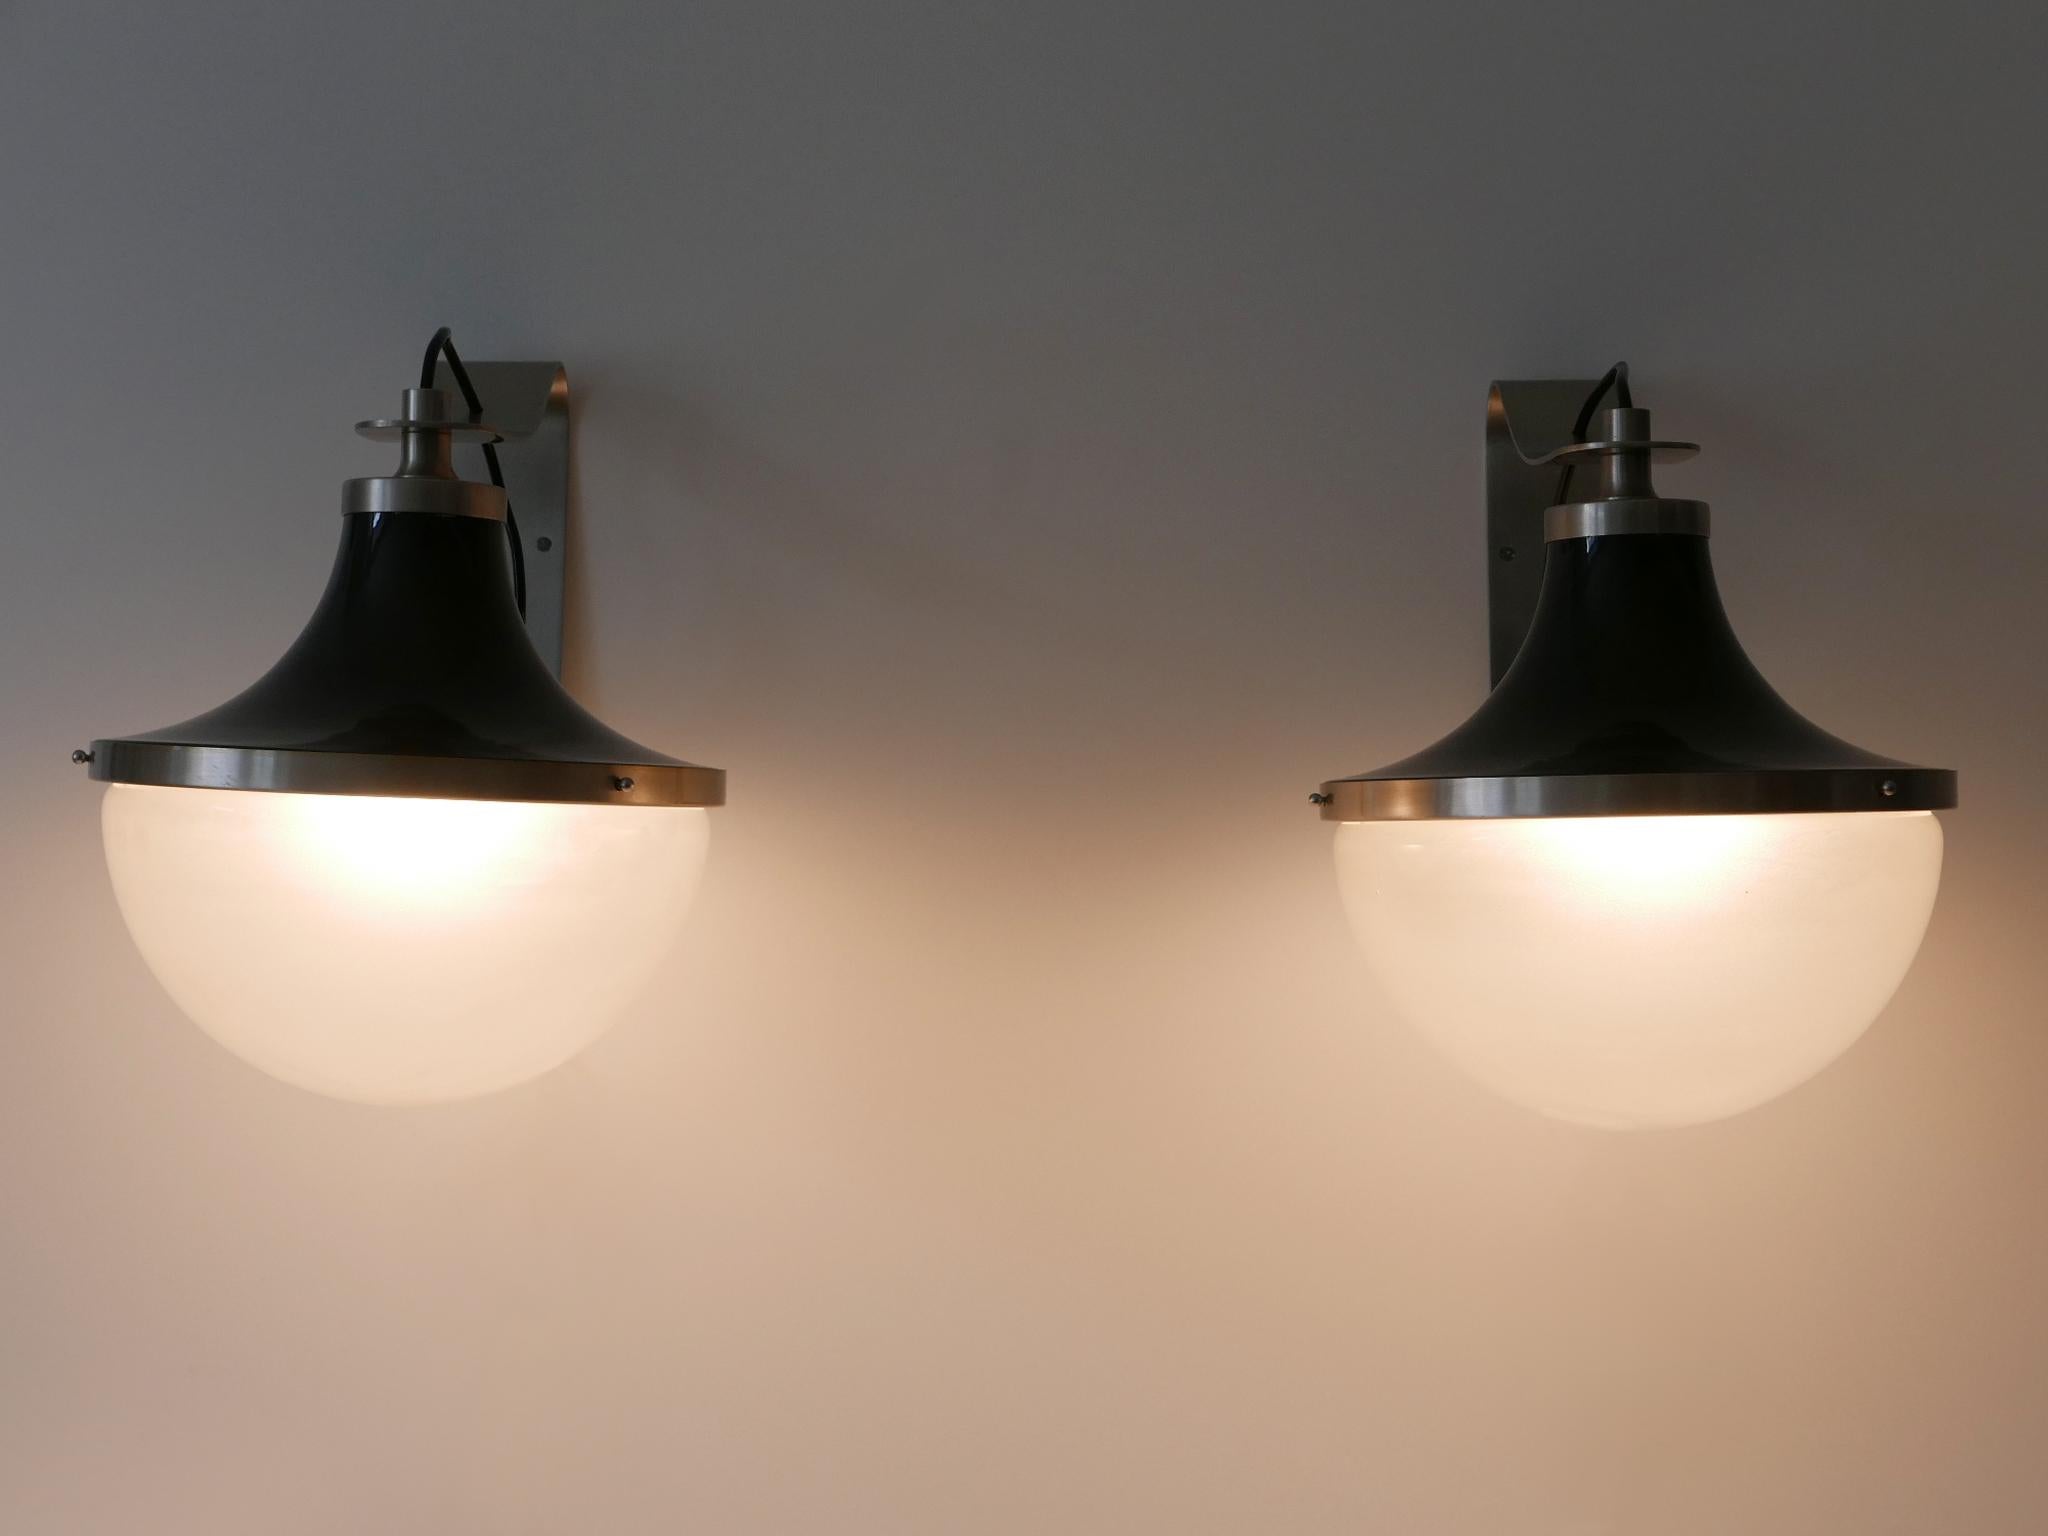 Italian Set of Two Mid-Century Modern Sconces 'Pi' by Sergio Mazza for Artemide 1960s For Sale